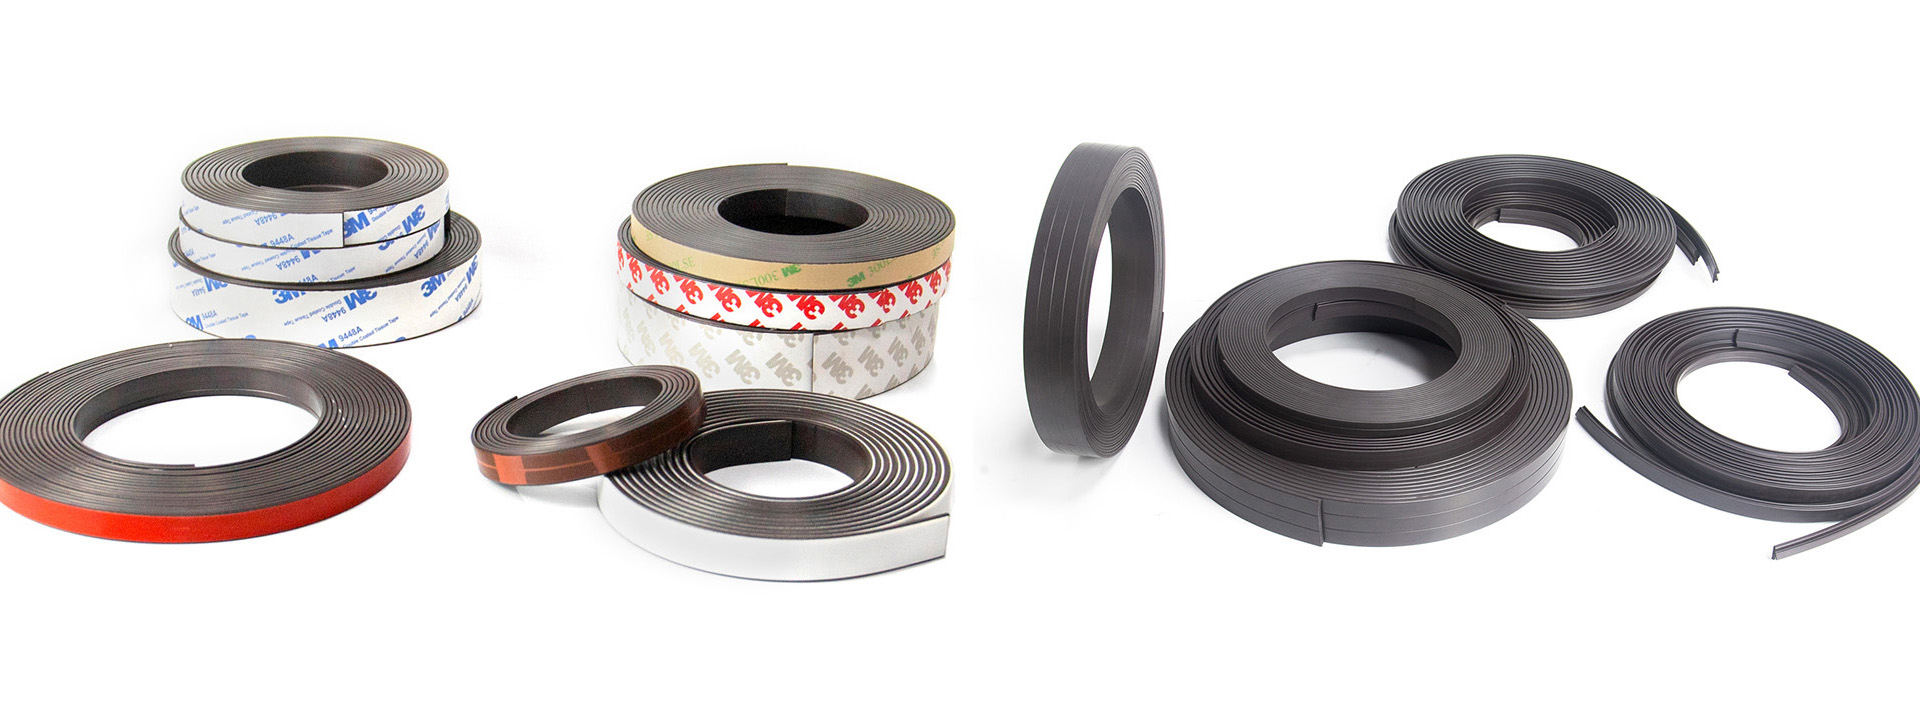 High Energy Magnetic Tape Strips, Flexible Magnetic Strip, Magnetic Tape Self Adhesive Strong, Perfect Magnetic Tape for Craft DIY Projects, Anisotropic Adhesive Magnets, Ferroband Magnets, Magnetic tape Magnetic foil Magnetic strips Magnet tape Strips foil Self-adhesive adhesive magnets Adhesive magnets